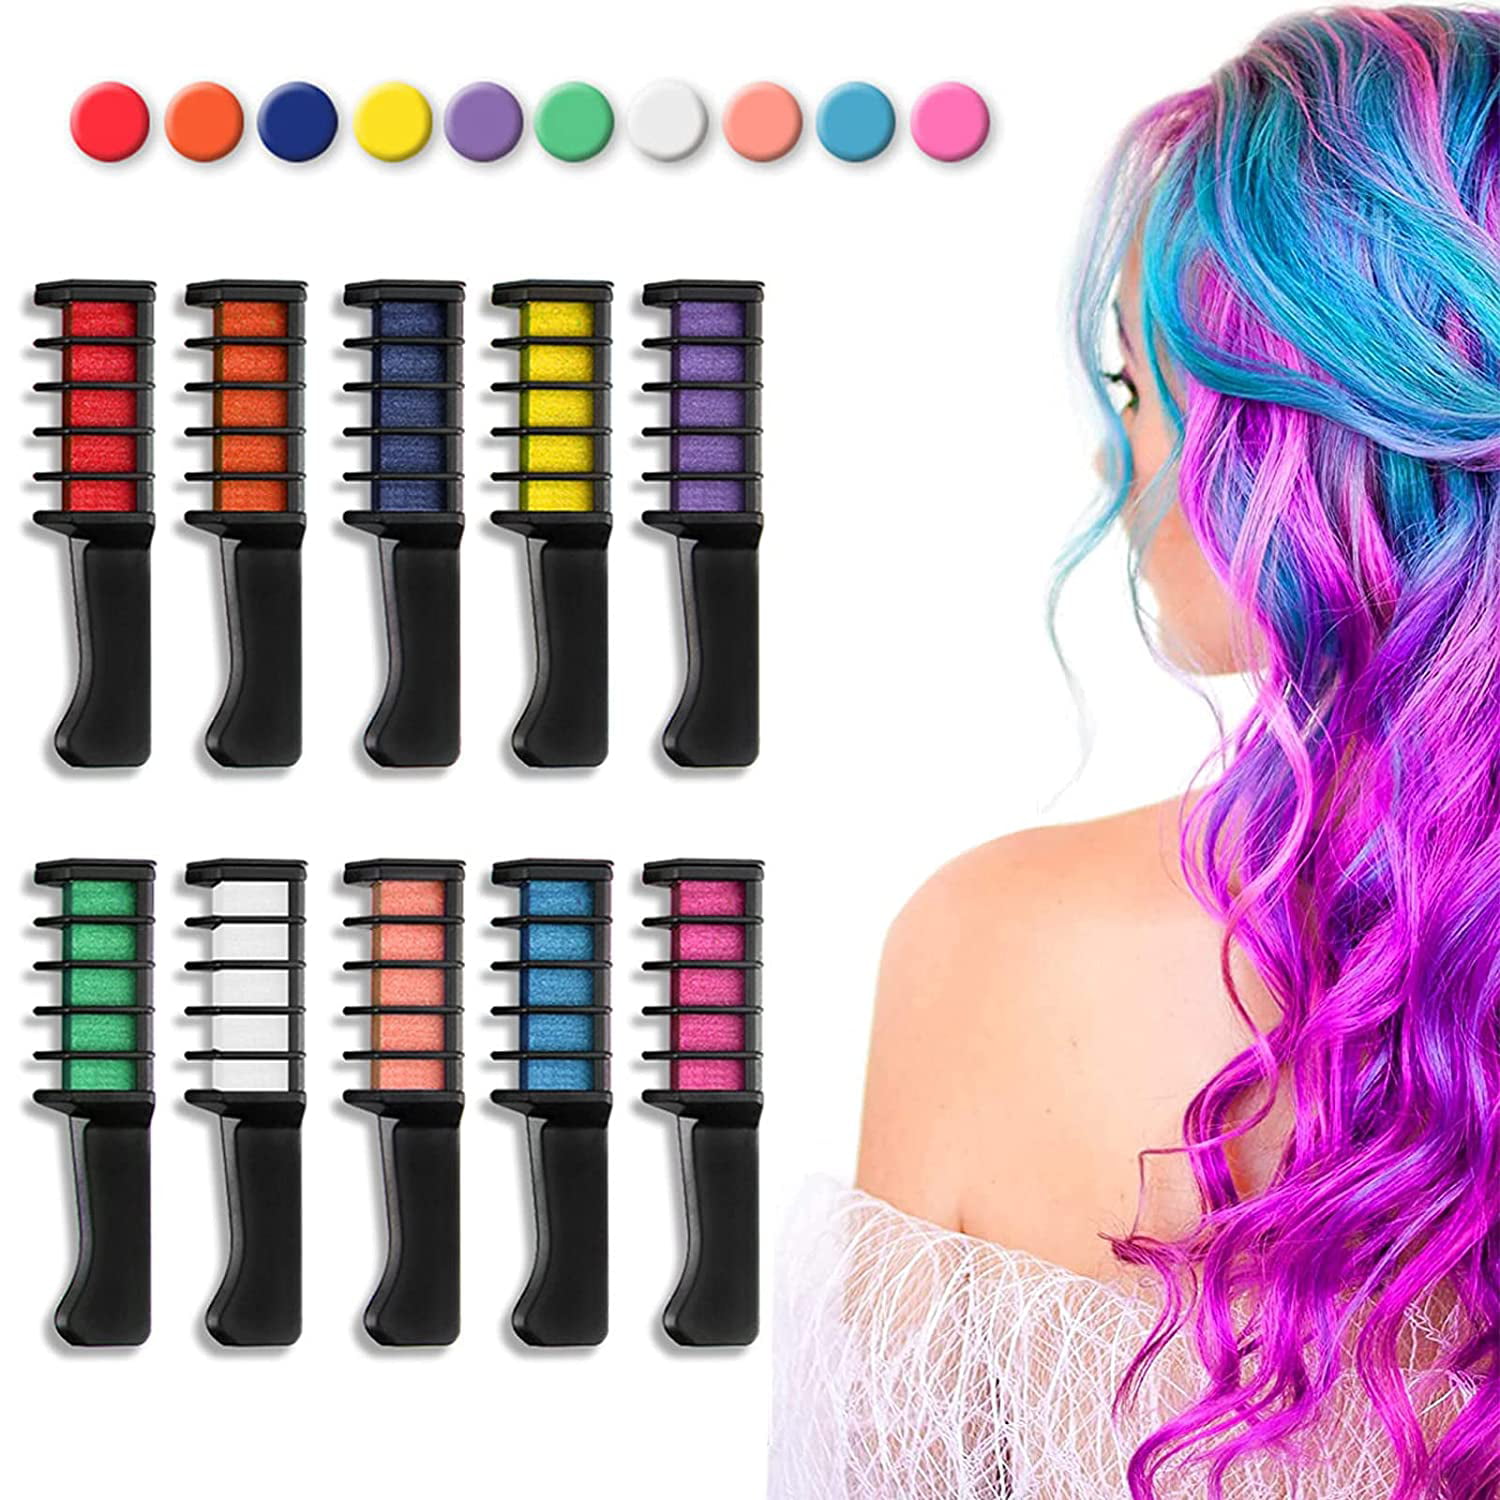 Hair Chalk for Kids Birthday Gift,Temporary Bright Hair Chalk Comb Set, Presents for Girls of Ages 4 5 6 7 8 9 10+ Washable Color, for Kids Hair